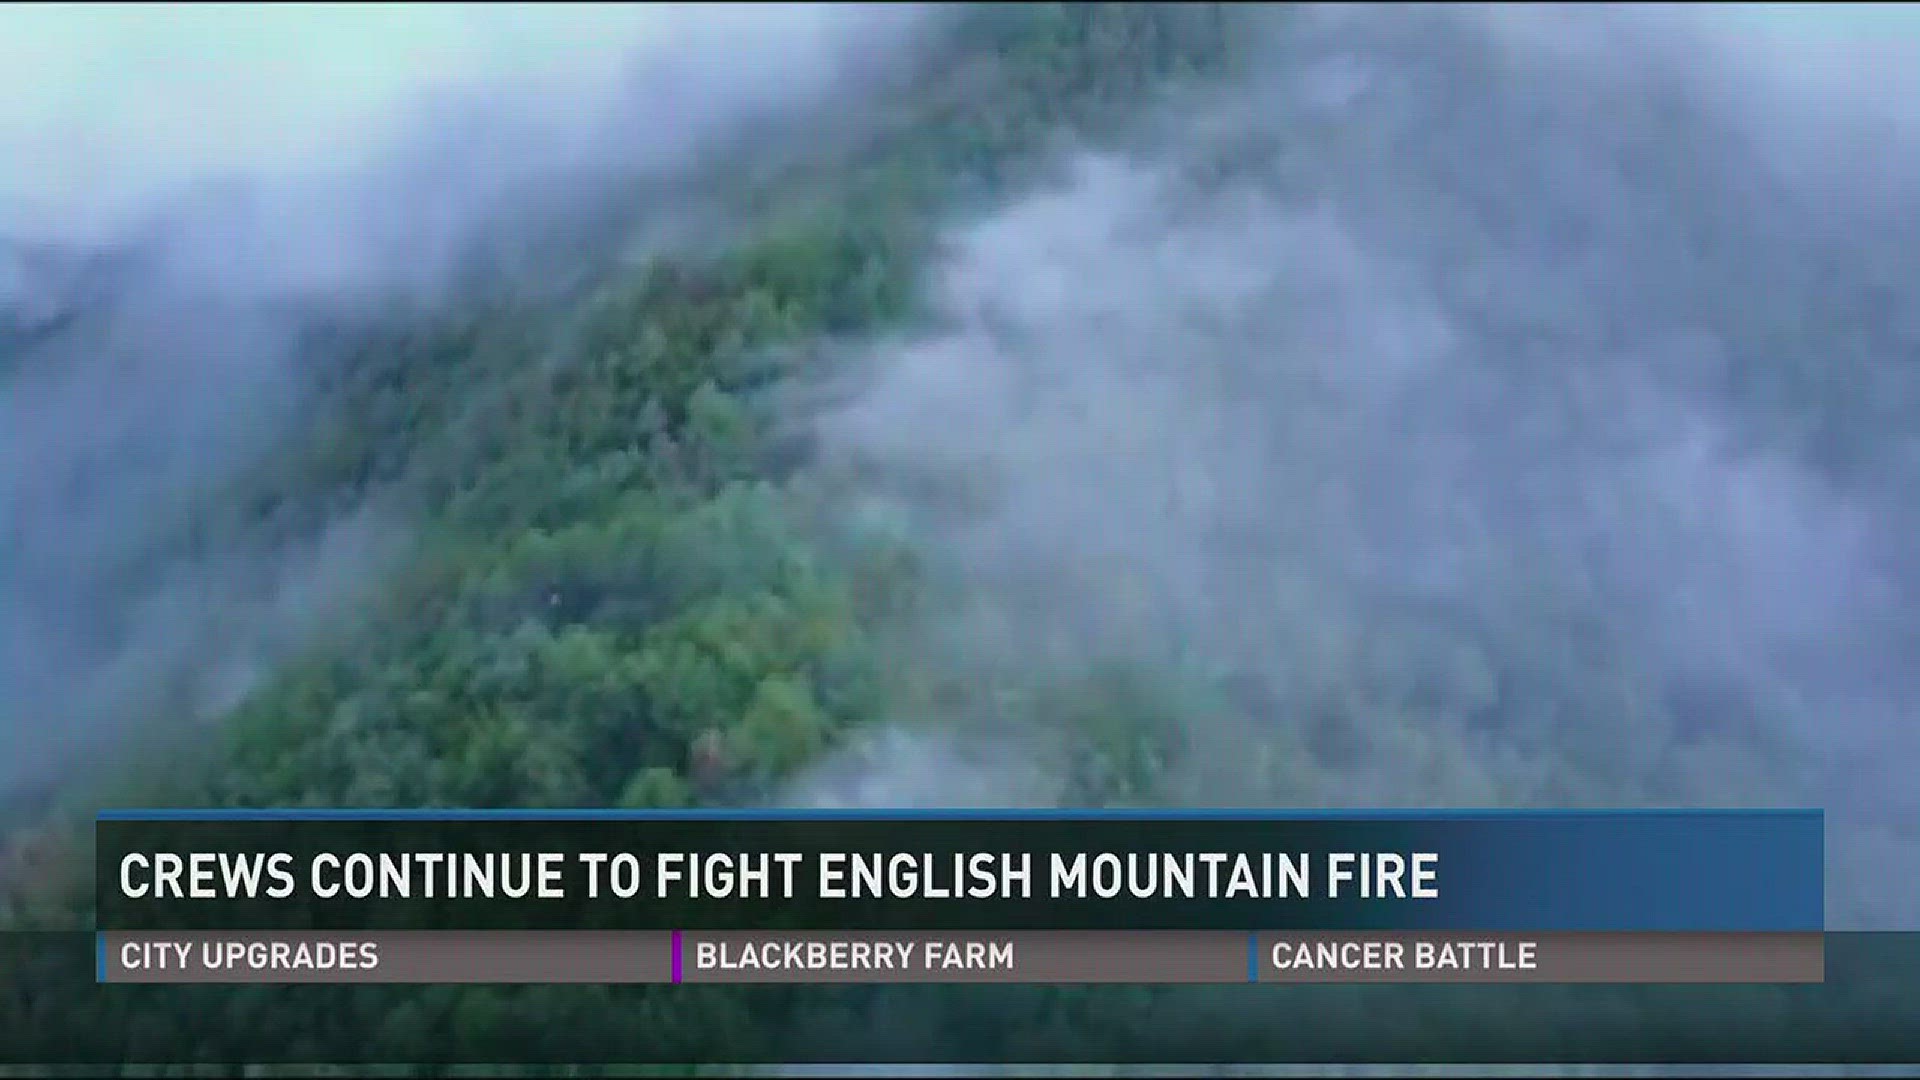 Aug. 30, 2017: Crews are still trying to extinguish a large fire burning on English Mountain.